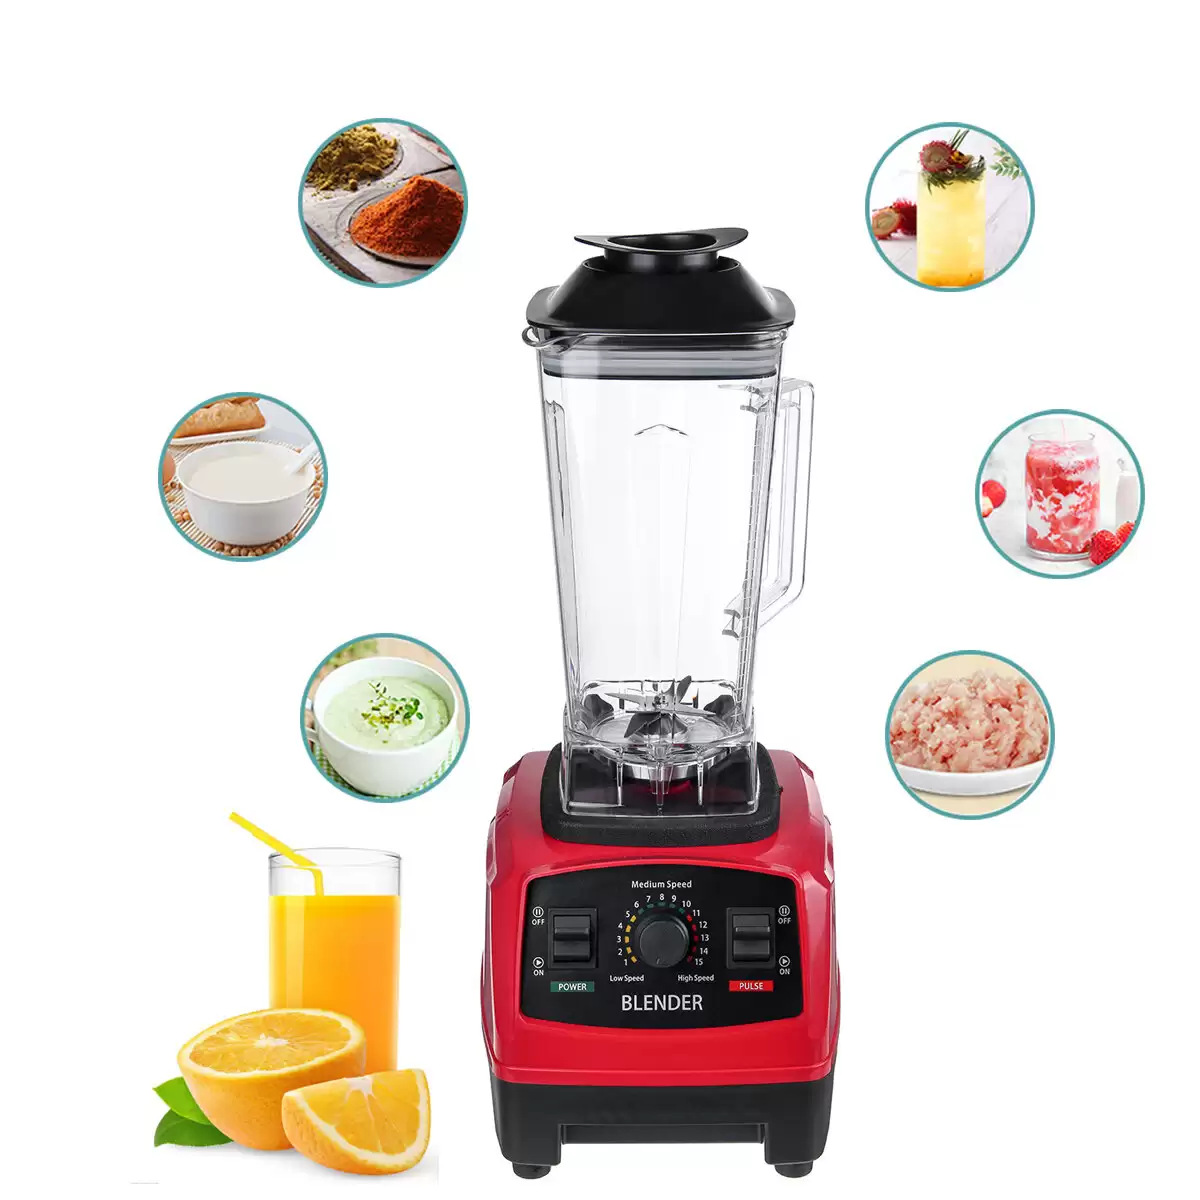 Order In Just $58.92 / €$79.99 2200w Wall-breaking Machine Household Multifunctional Mixing Cooking Machines Food Supplement Soy Milk Processor For Kitchen Tool With This Coupon At Banggood